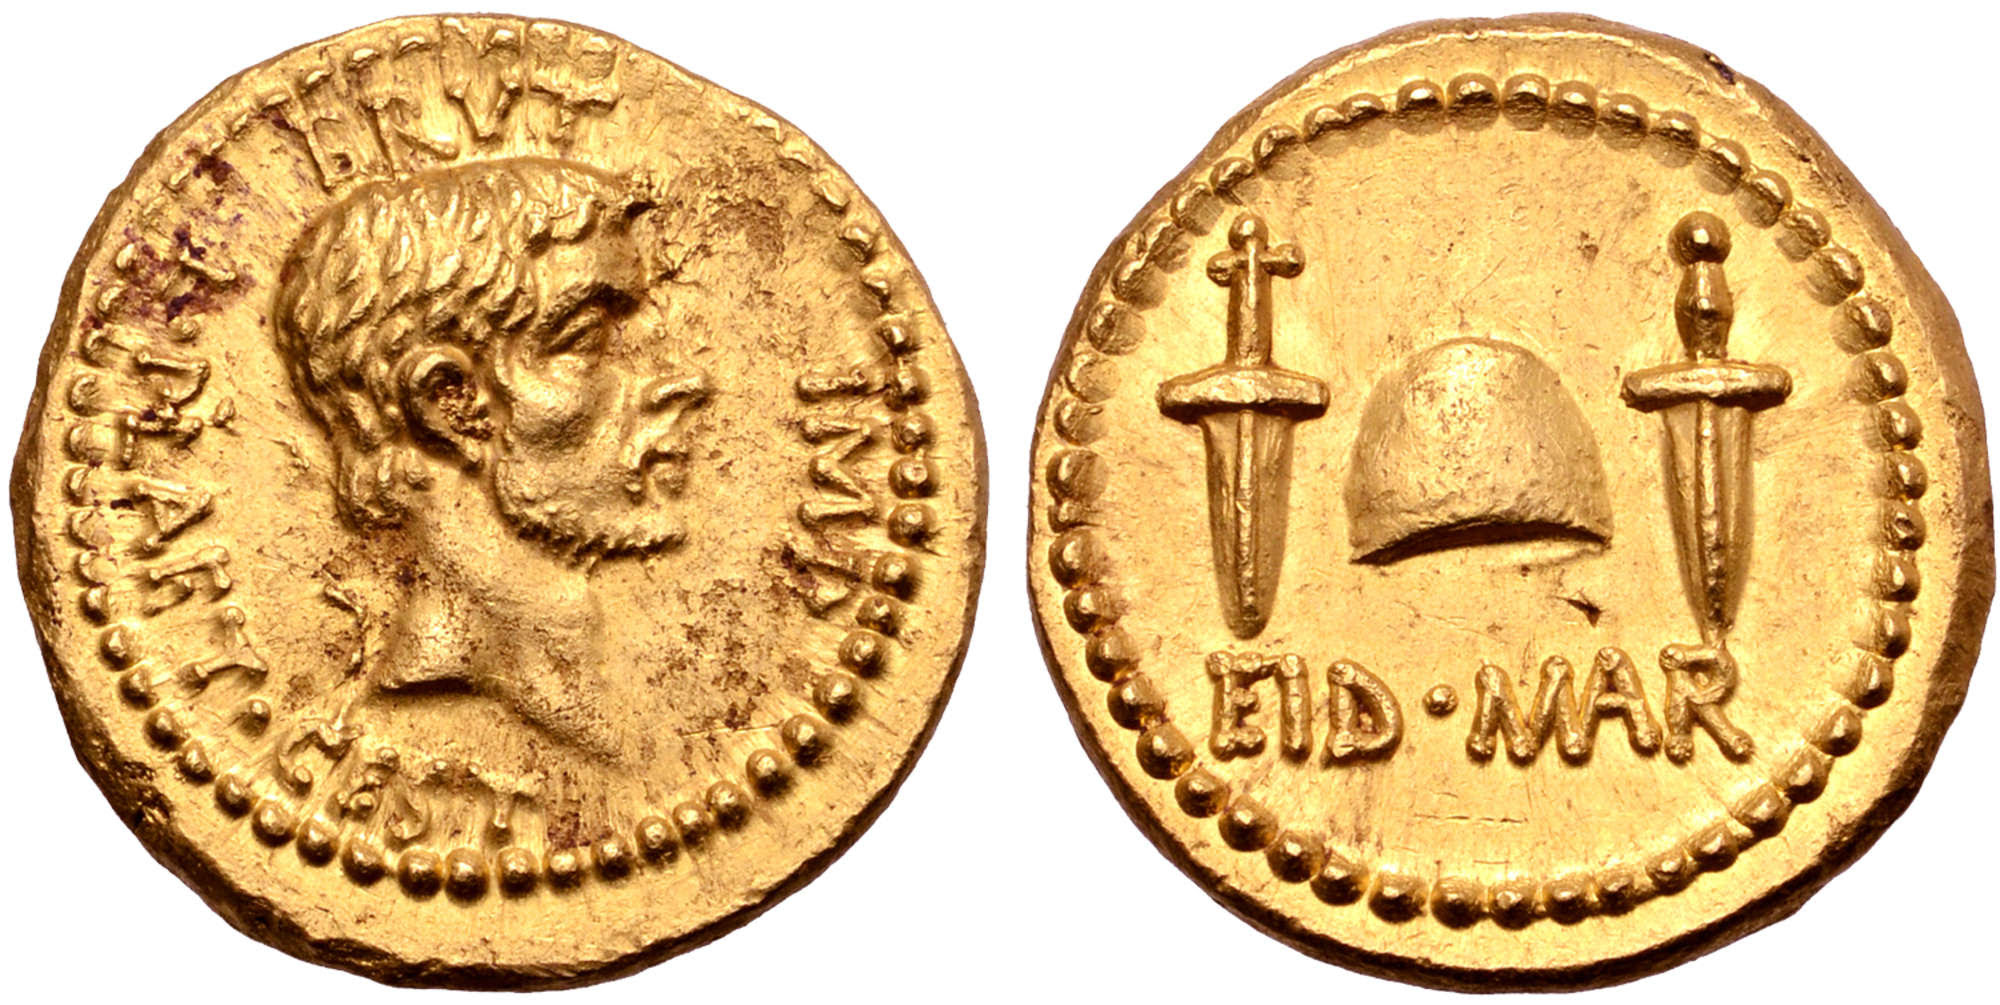 The Eid Mar Coin sold at Roma Numismatics